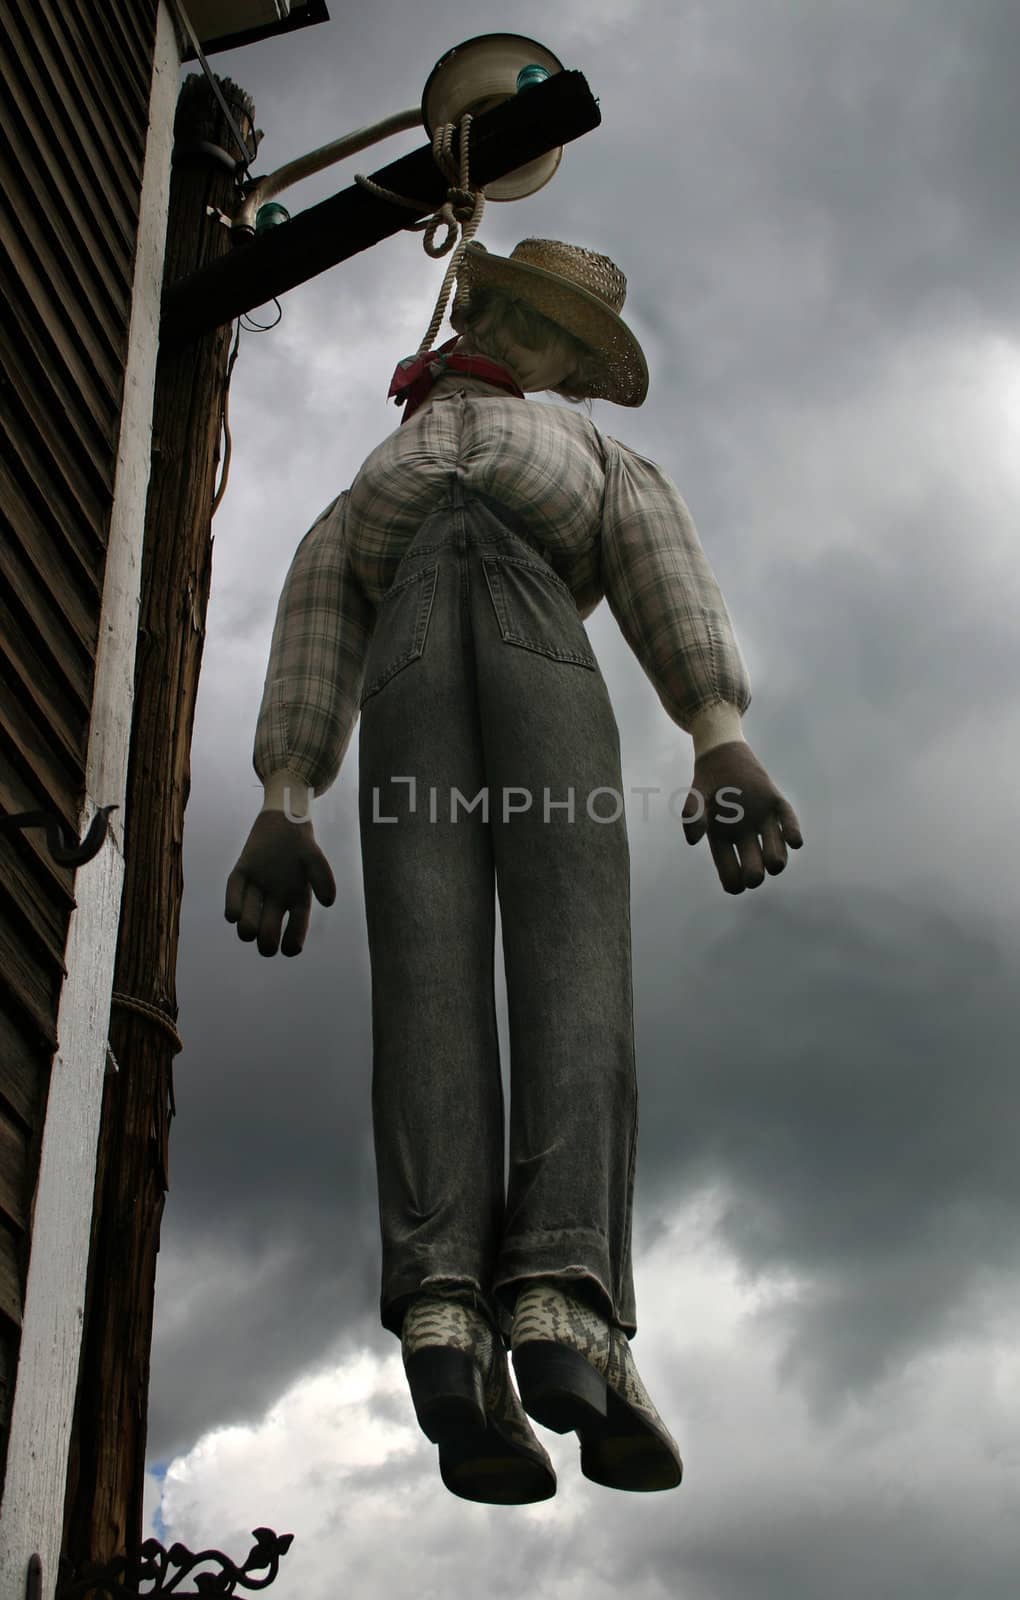 Spooky figure hanging from beam against an ominous, dark, cloudy stormy sky.